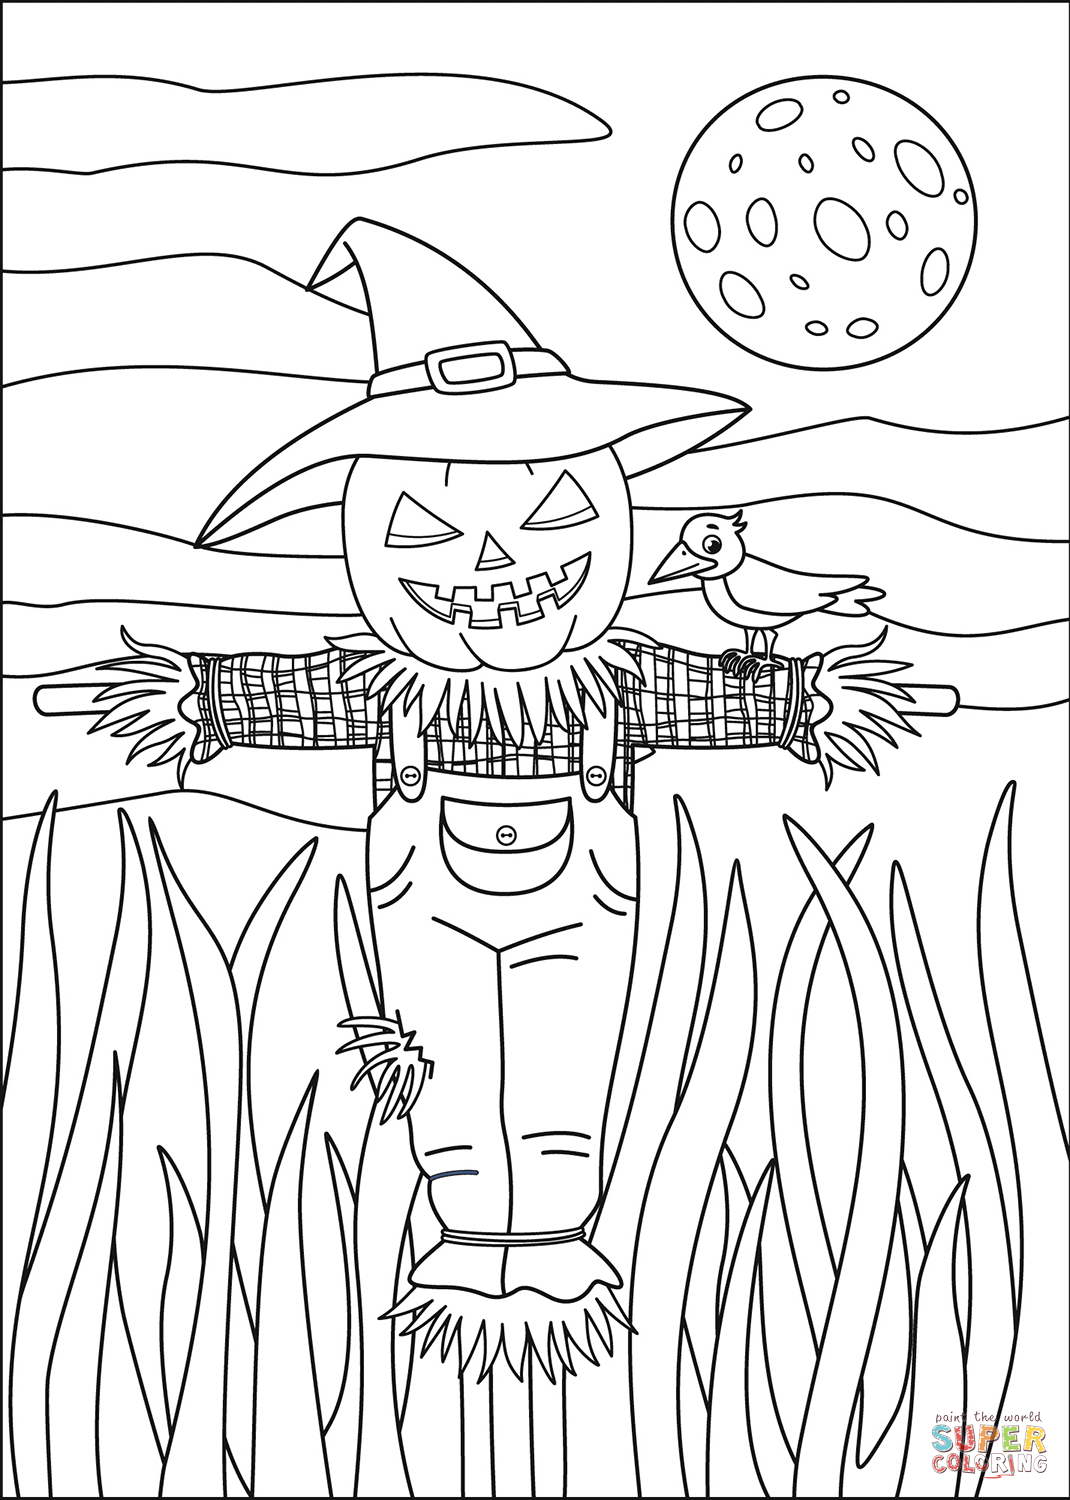 Scarecrow coloring page free printable coloring pages